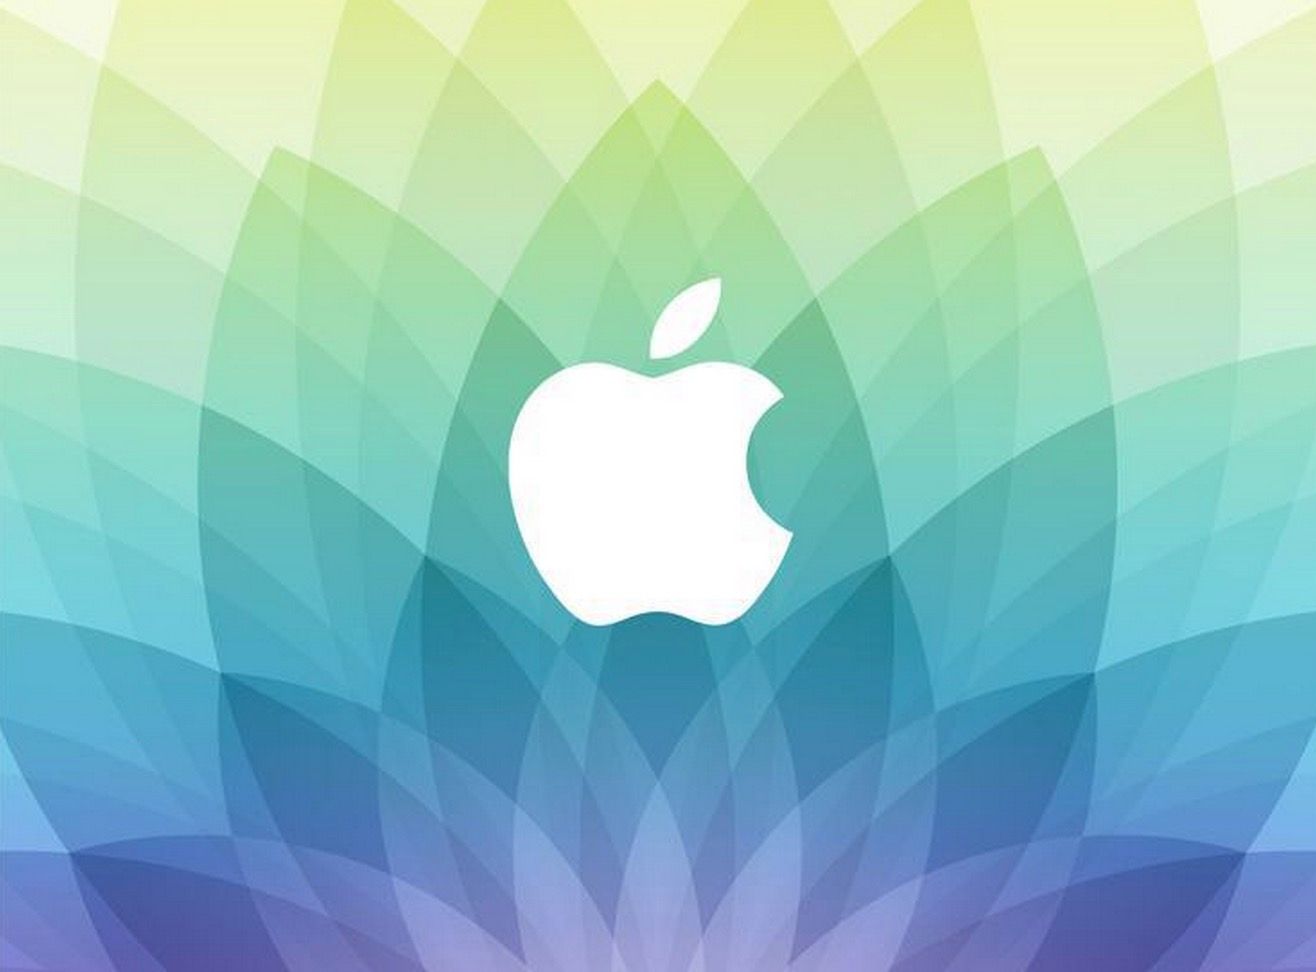 apple preparing spring forward event for 9 march likely for apple watch image 1